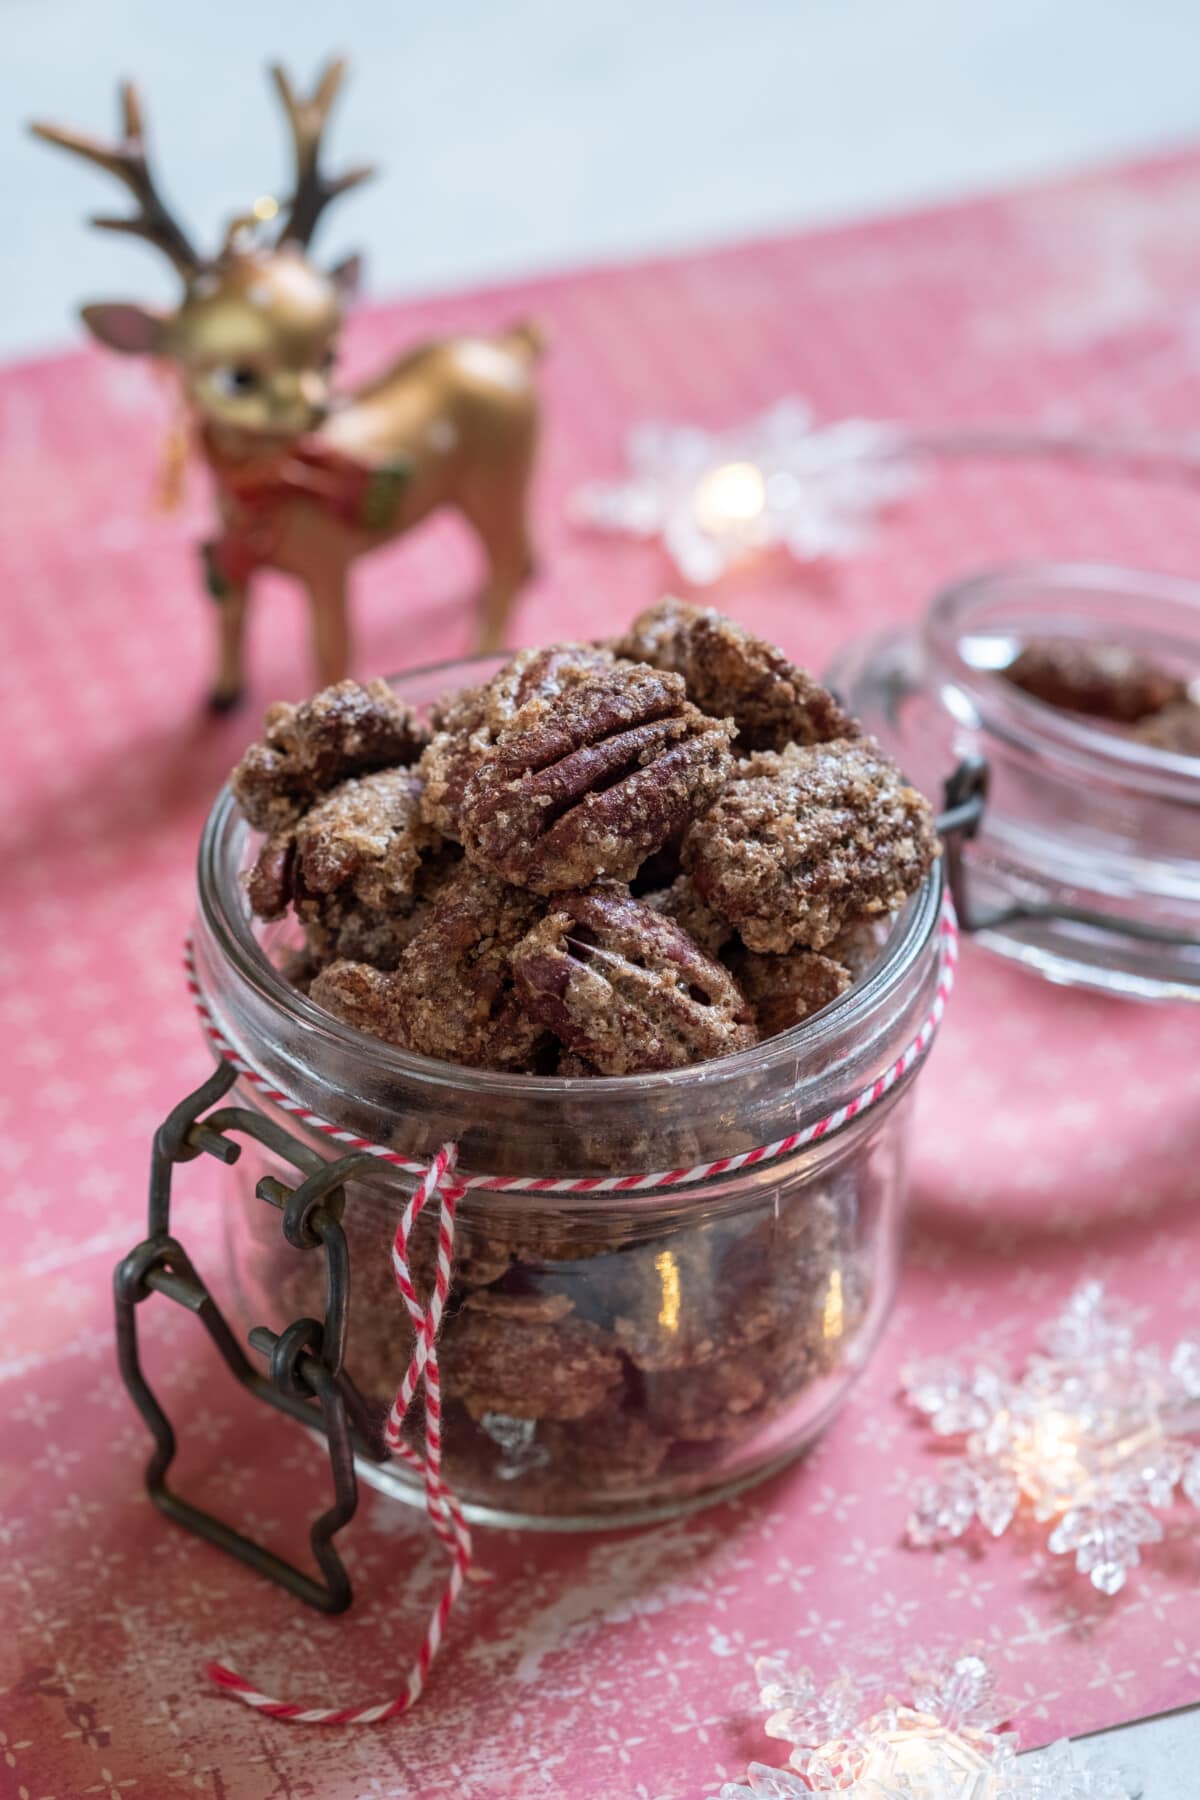 Candied Nuts in a Jar